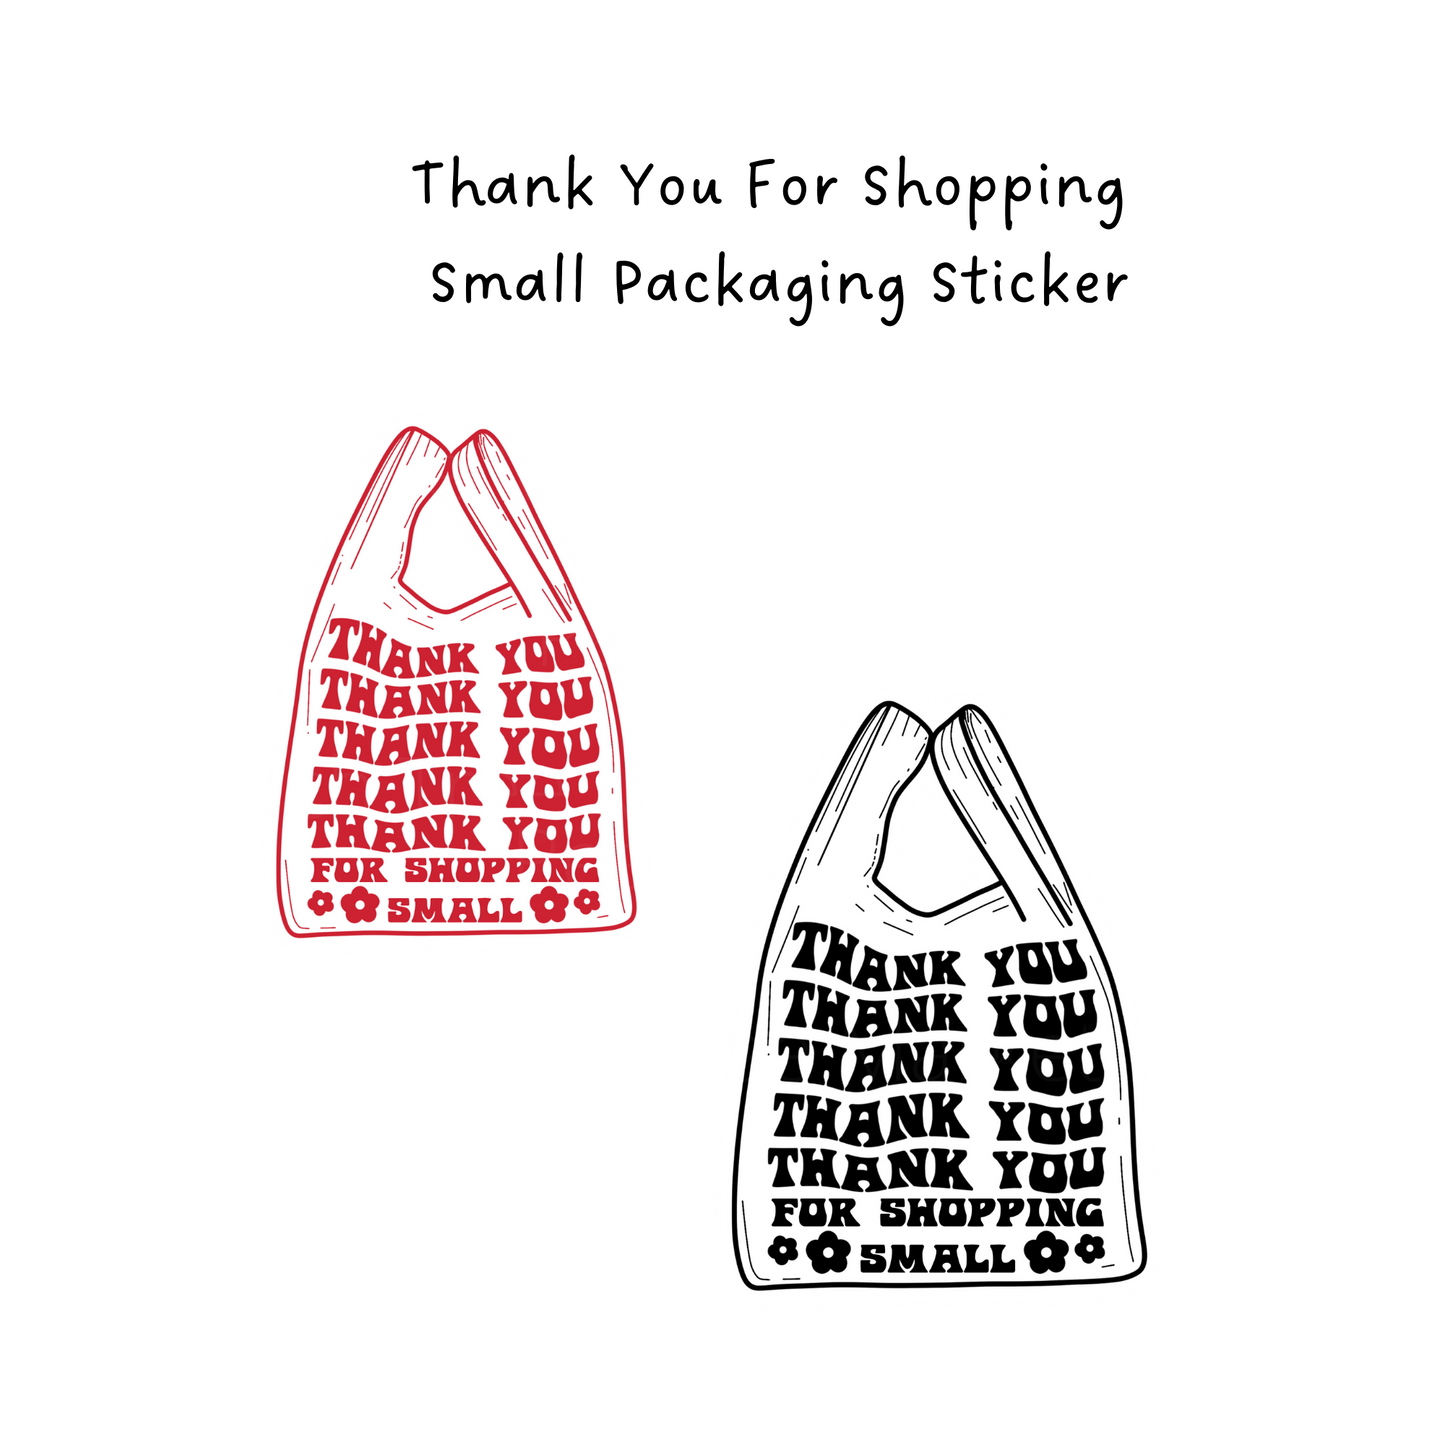 Thank You For Shopping Small Packaging Sticker